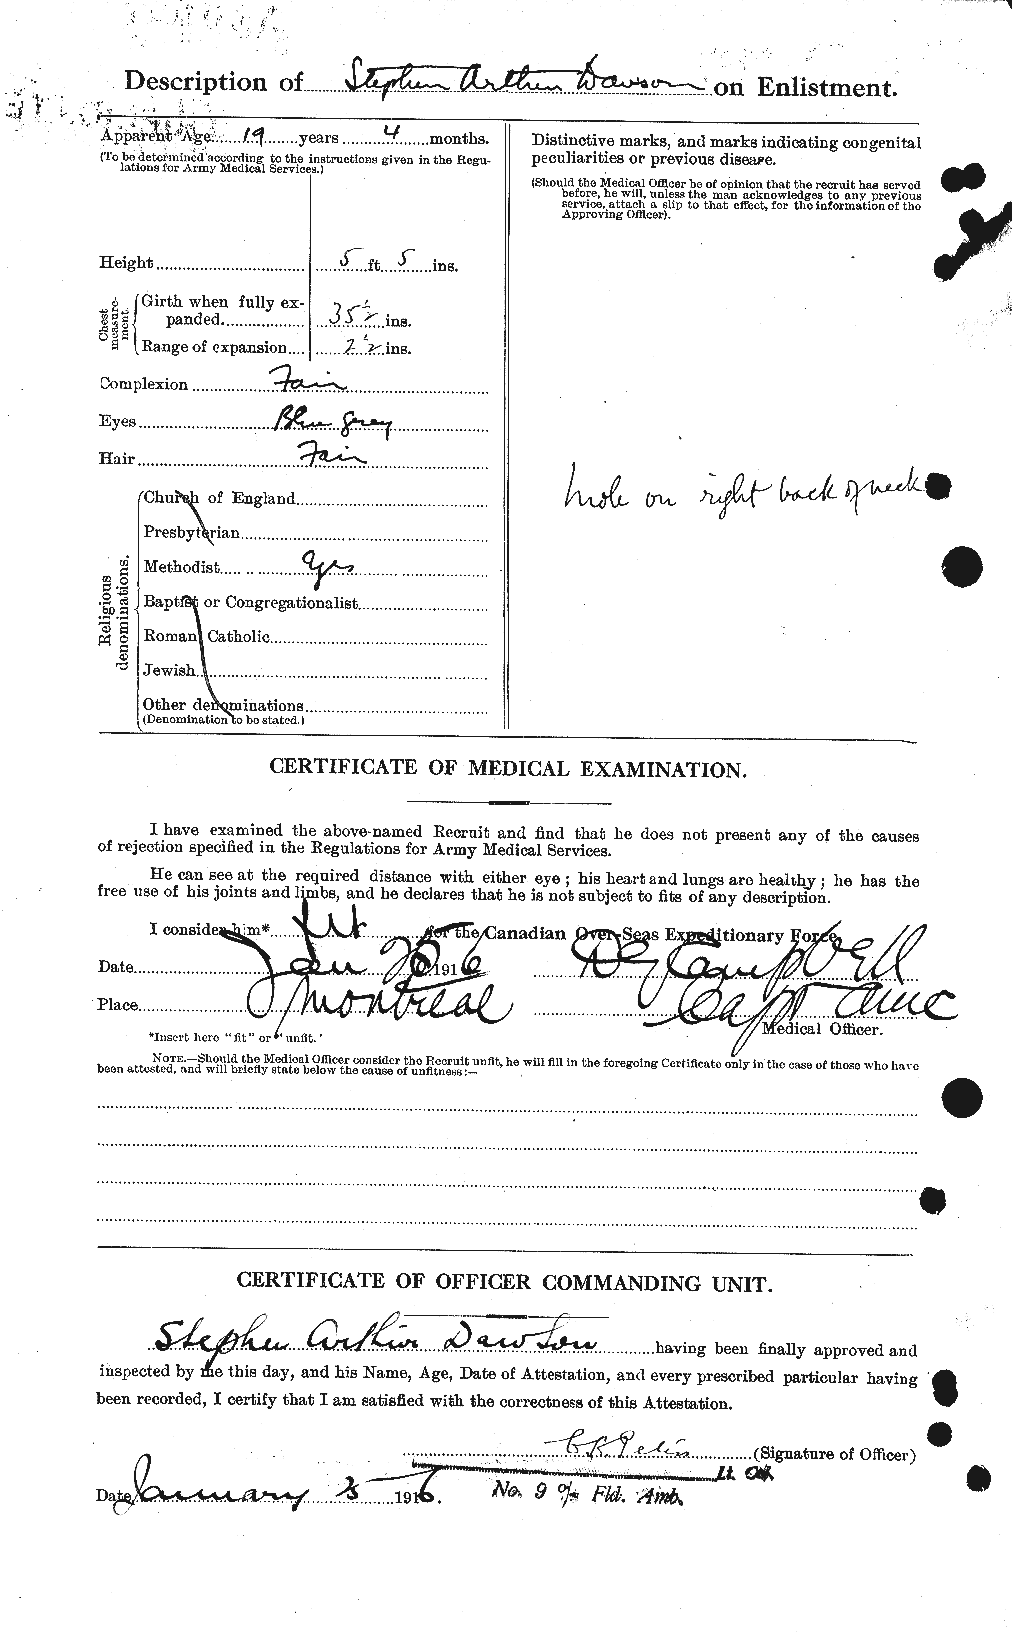 Personnel Records of the First World War - CEF 282821b